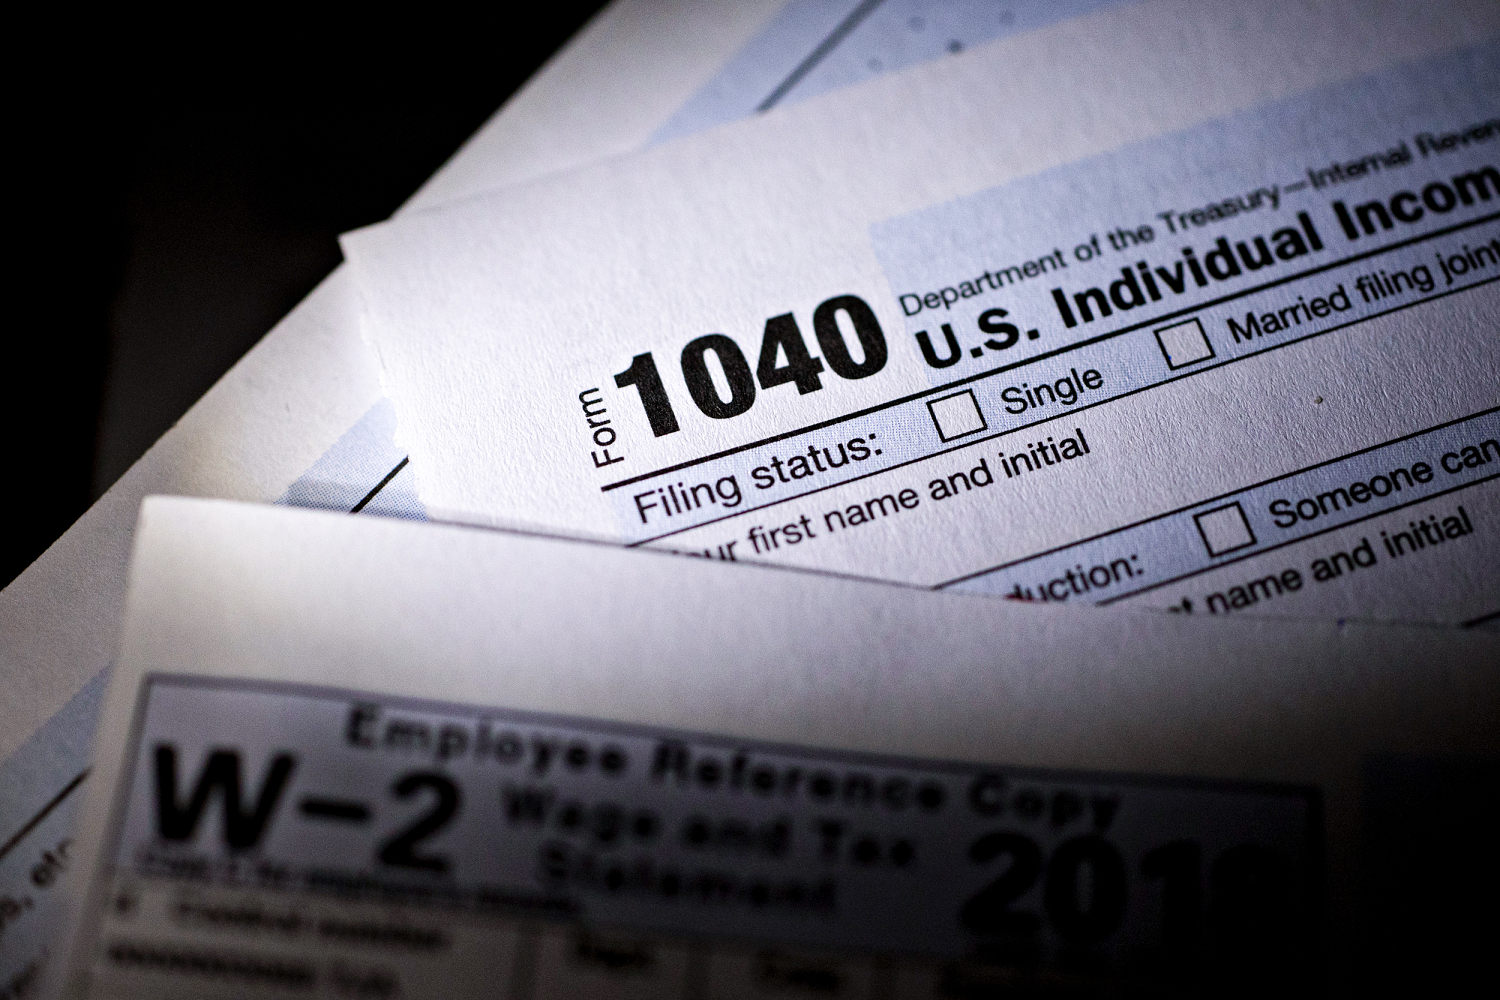 More than $1 billion in federal tax refunds unclaimed as deadline to file approaches